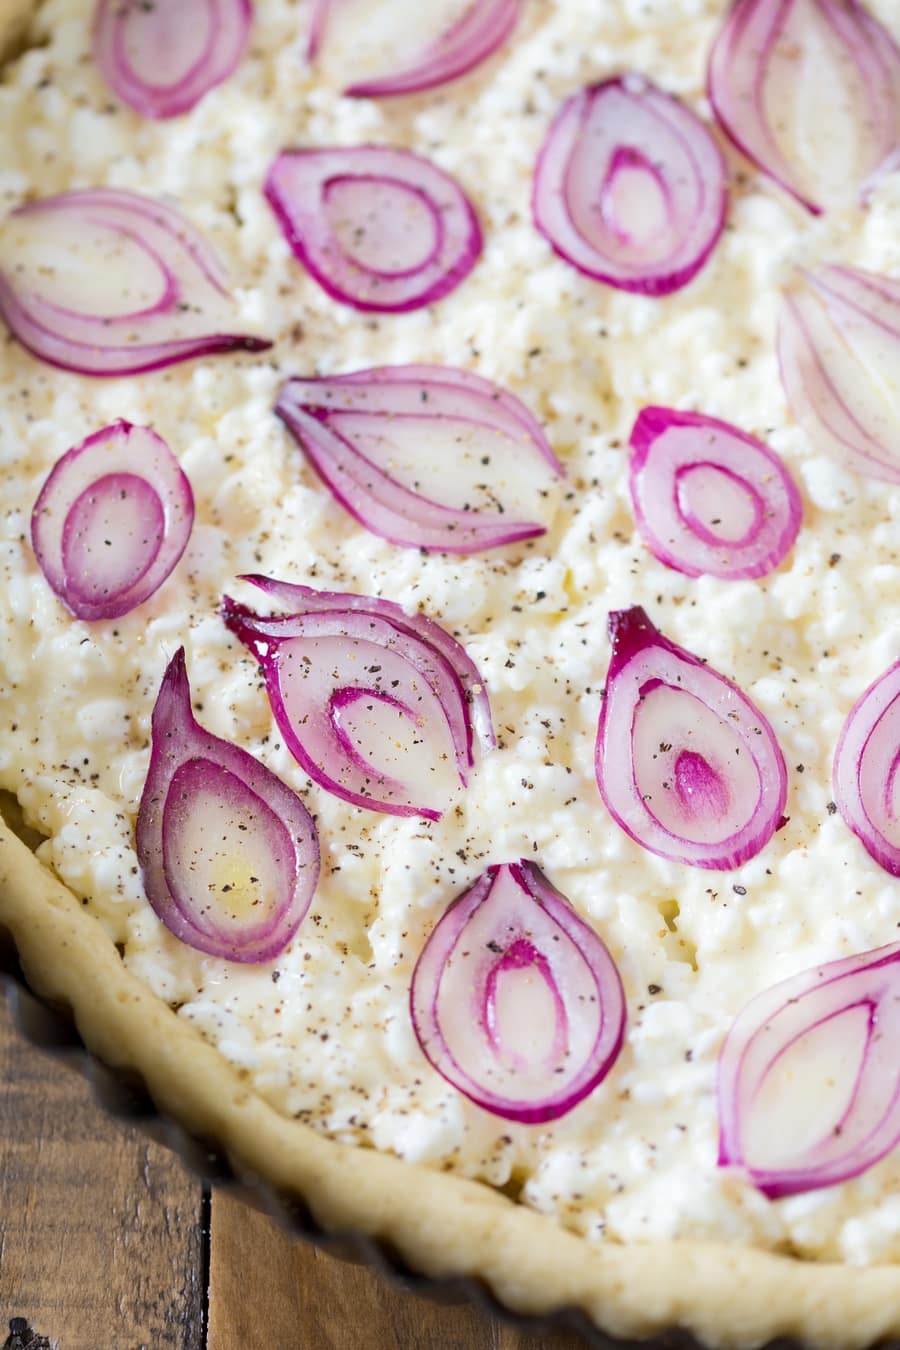 Sliced pearl onions over cottage cheese filling.